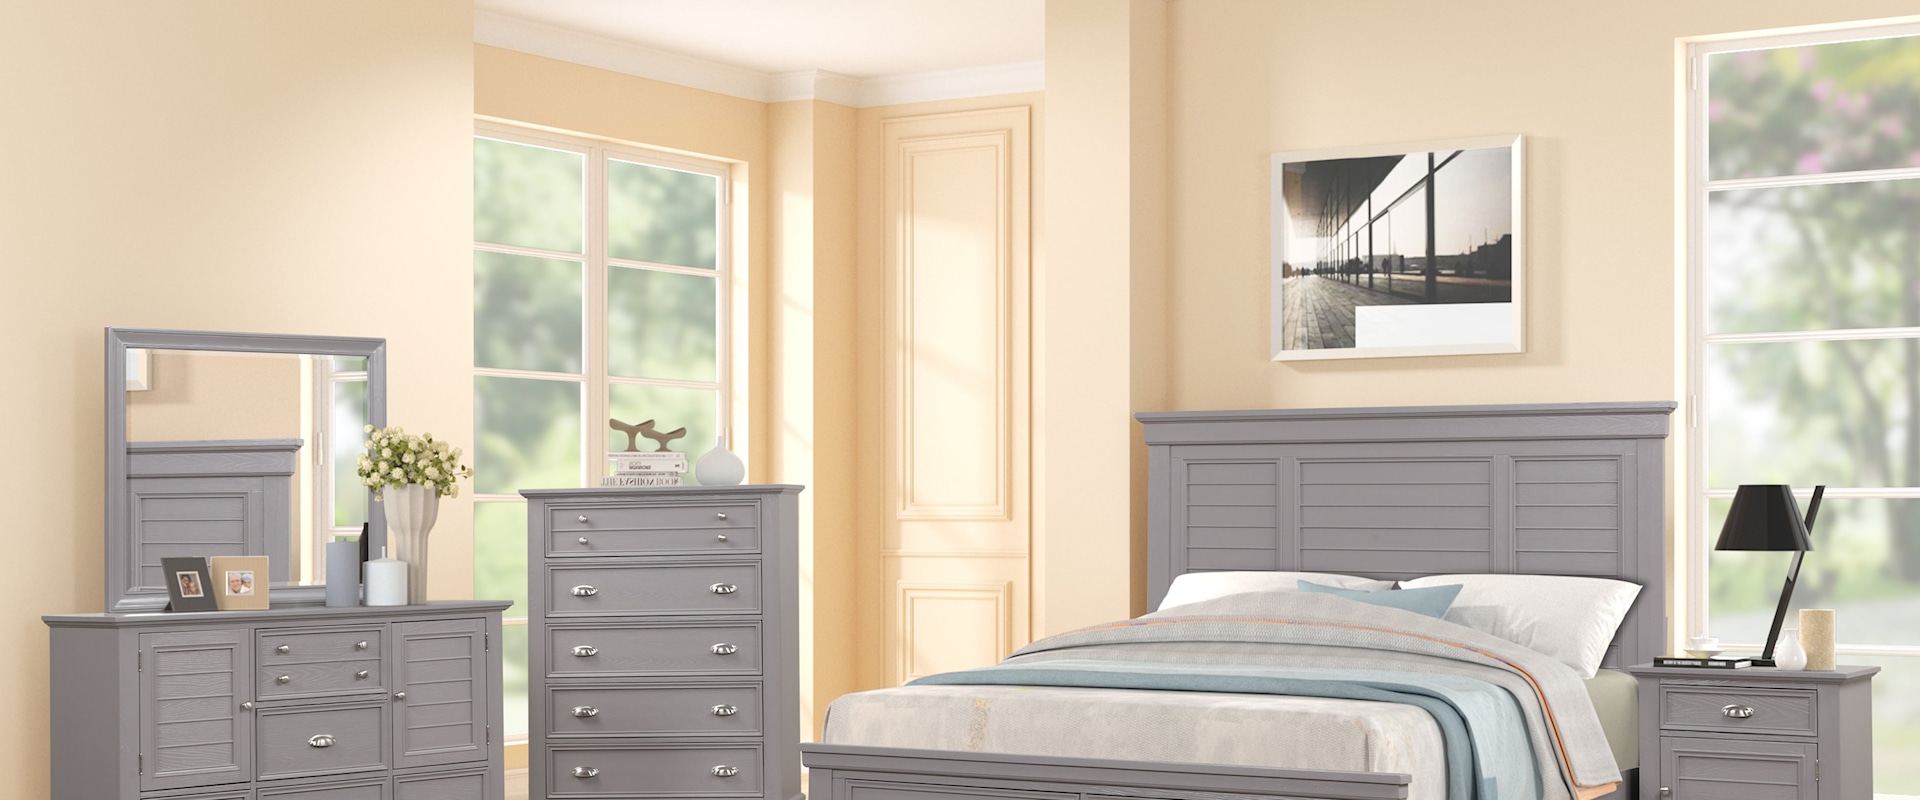 Transitional 5-Piece Queen Bedroom Set with Footboard Storage Bed